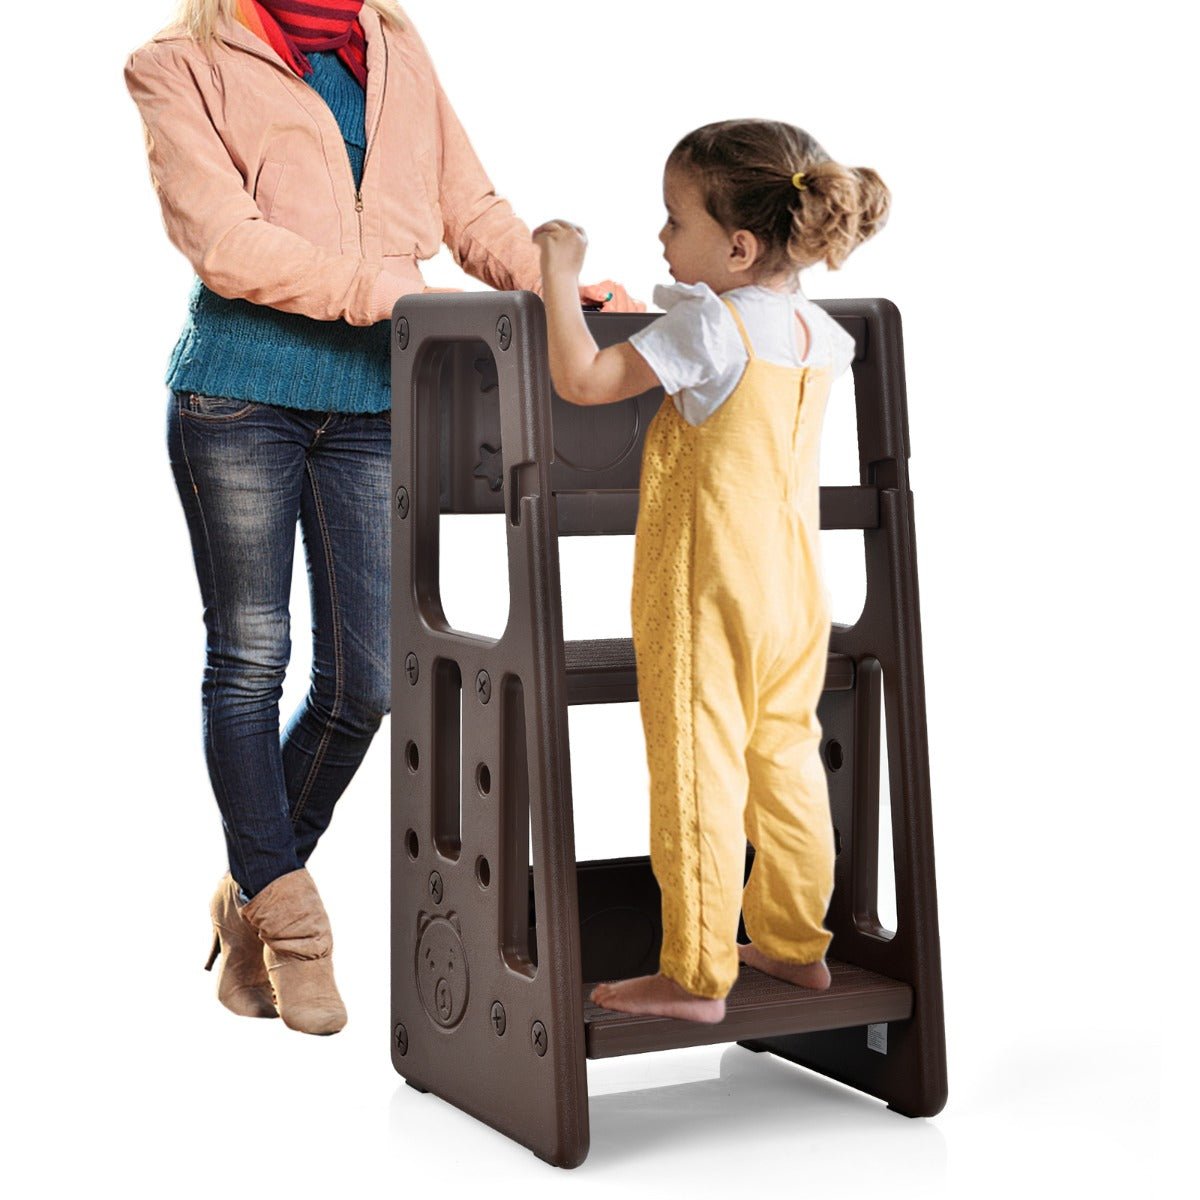 Kids Learning Stool - Coffee-coloured Step Aid with Double Safety Rails